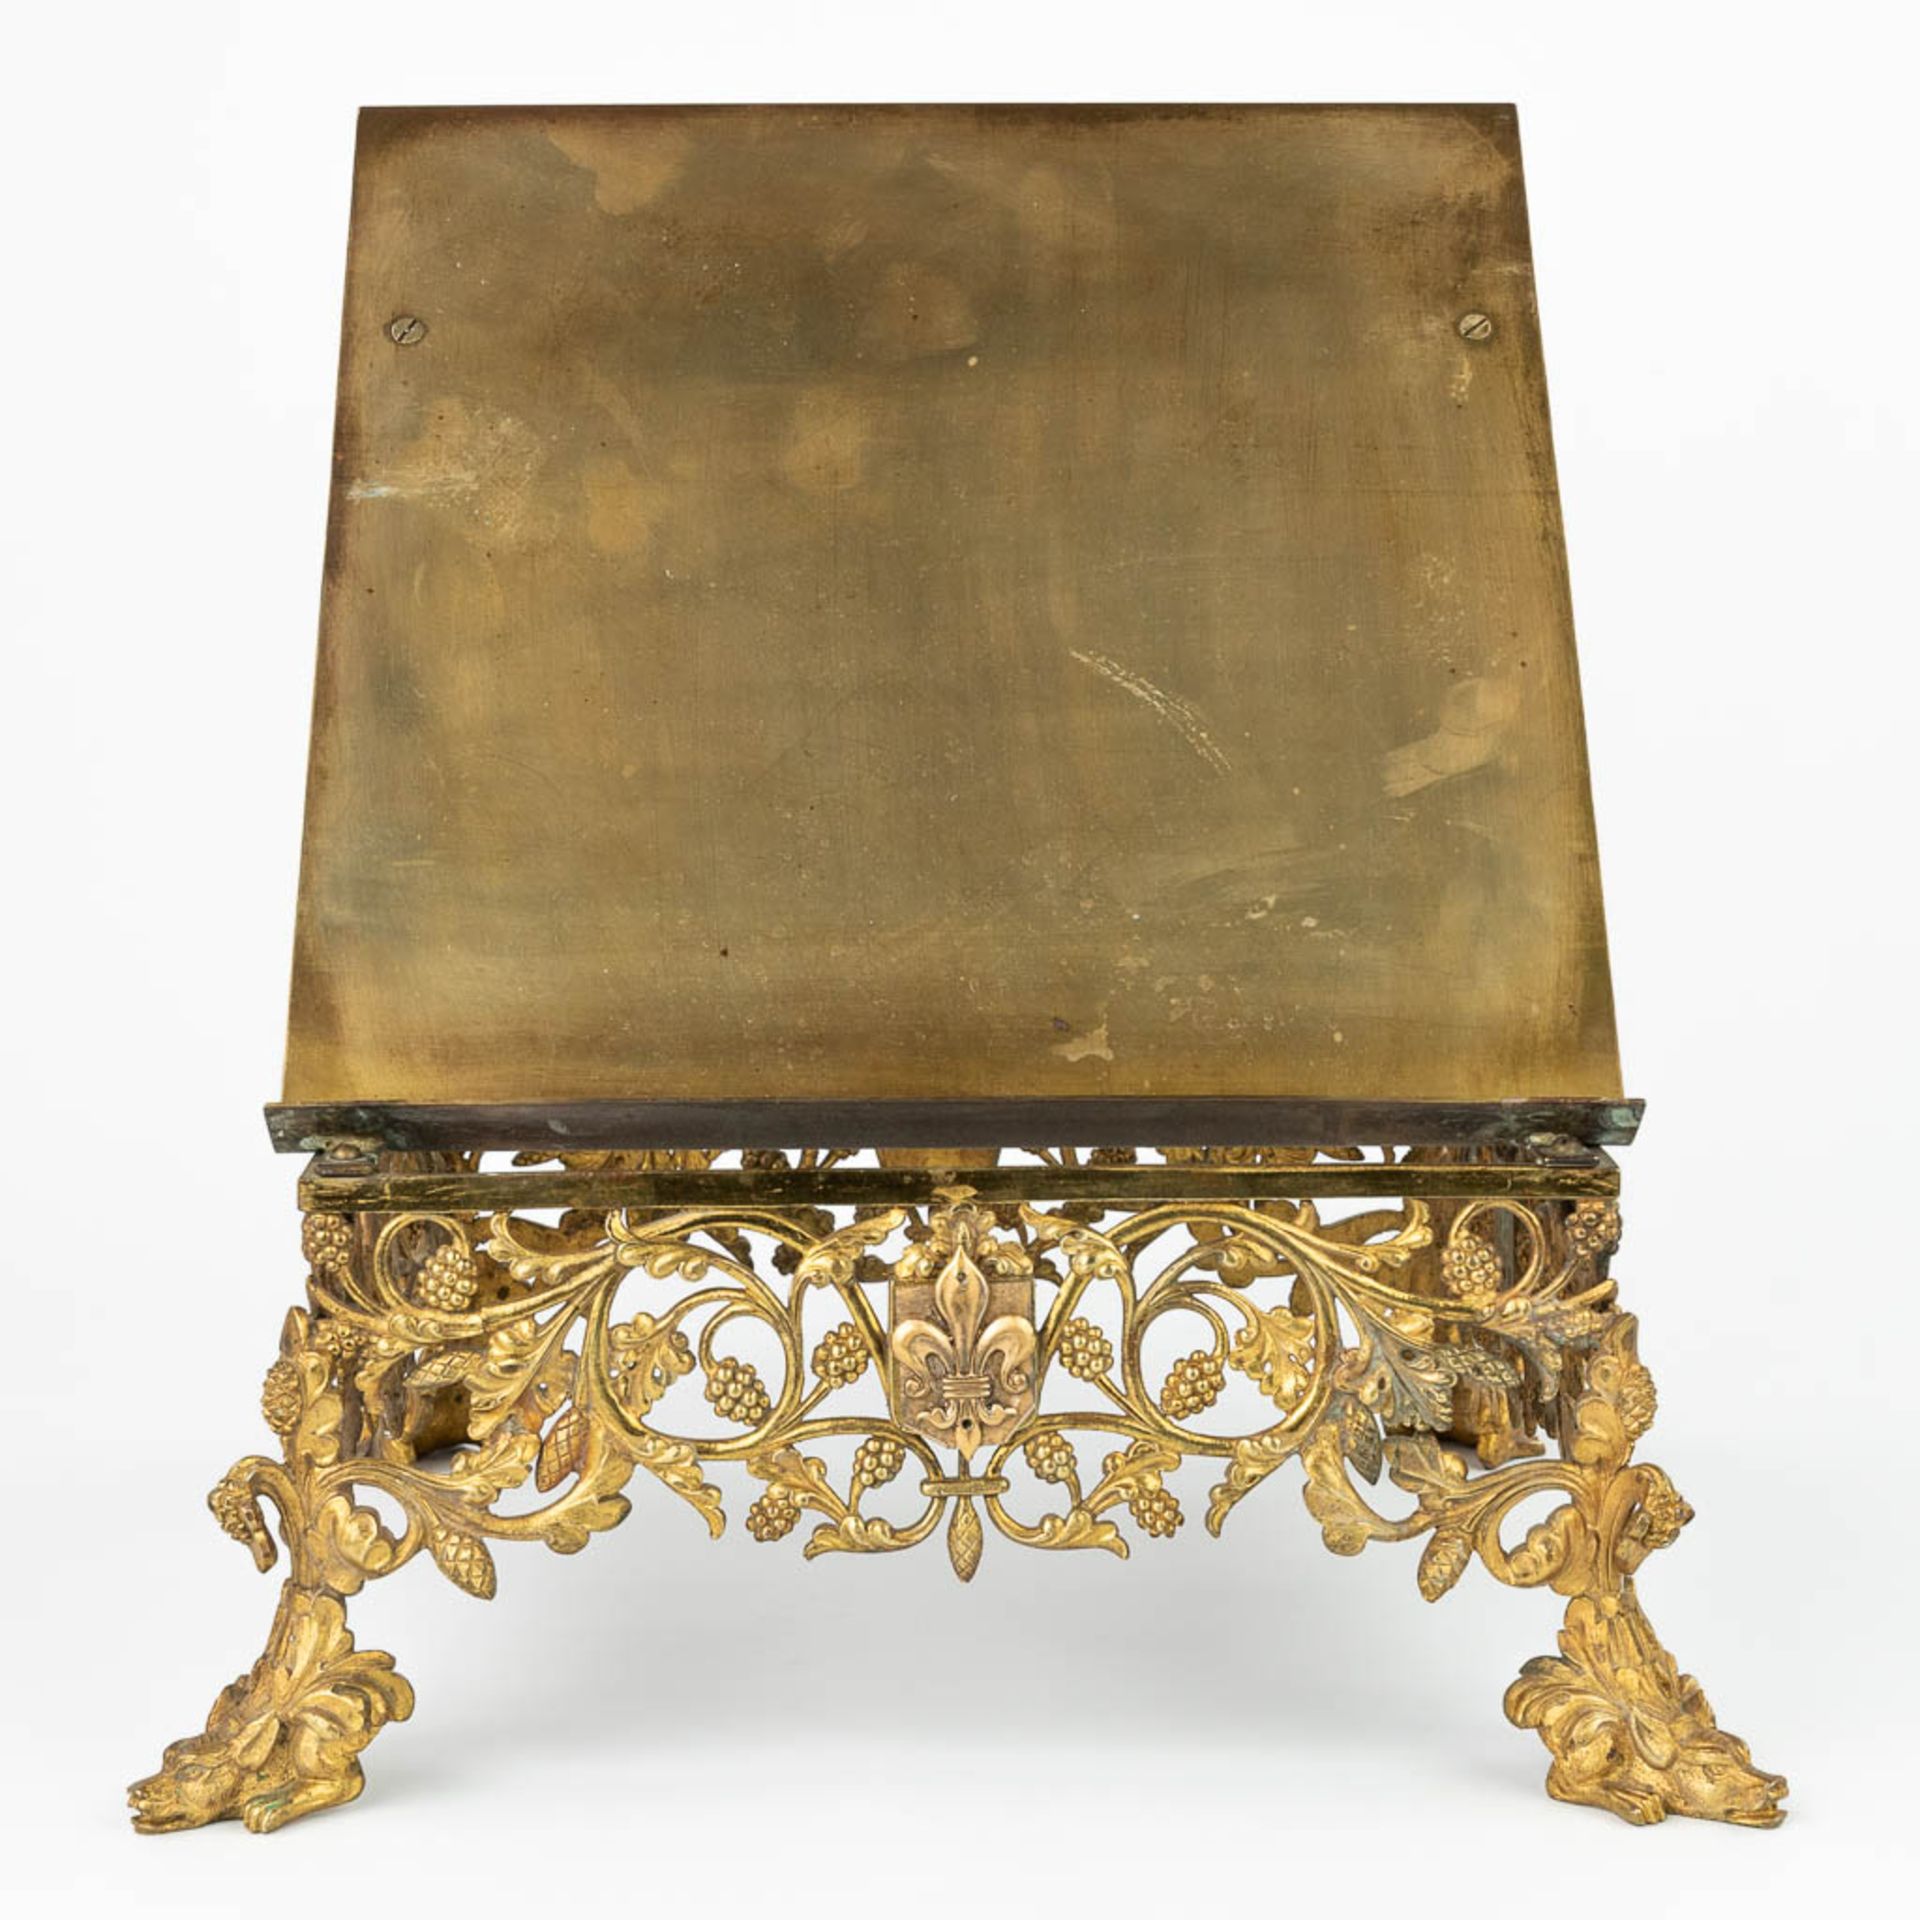 A missal stand made of copper, decorated with mythological figurines and fleur de lis. (H:38cm) - Image 7 of 9